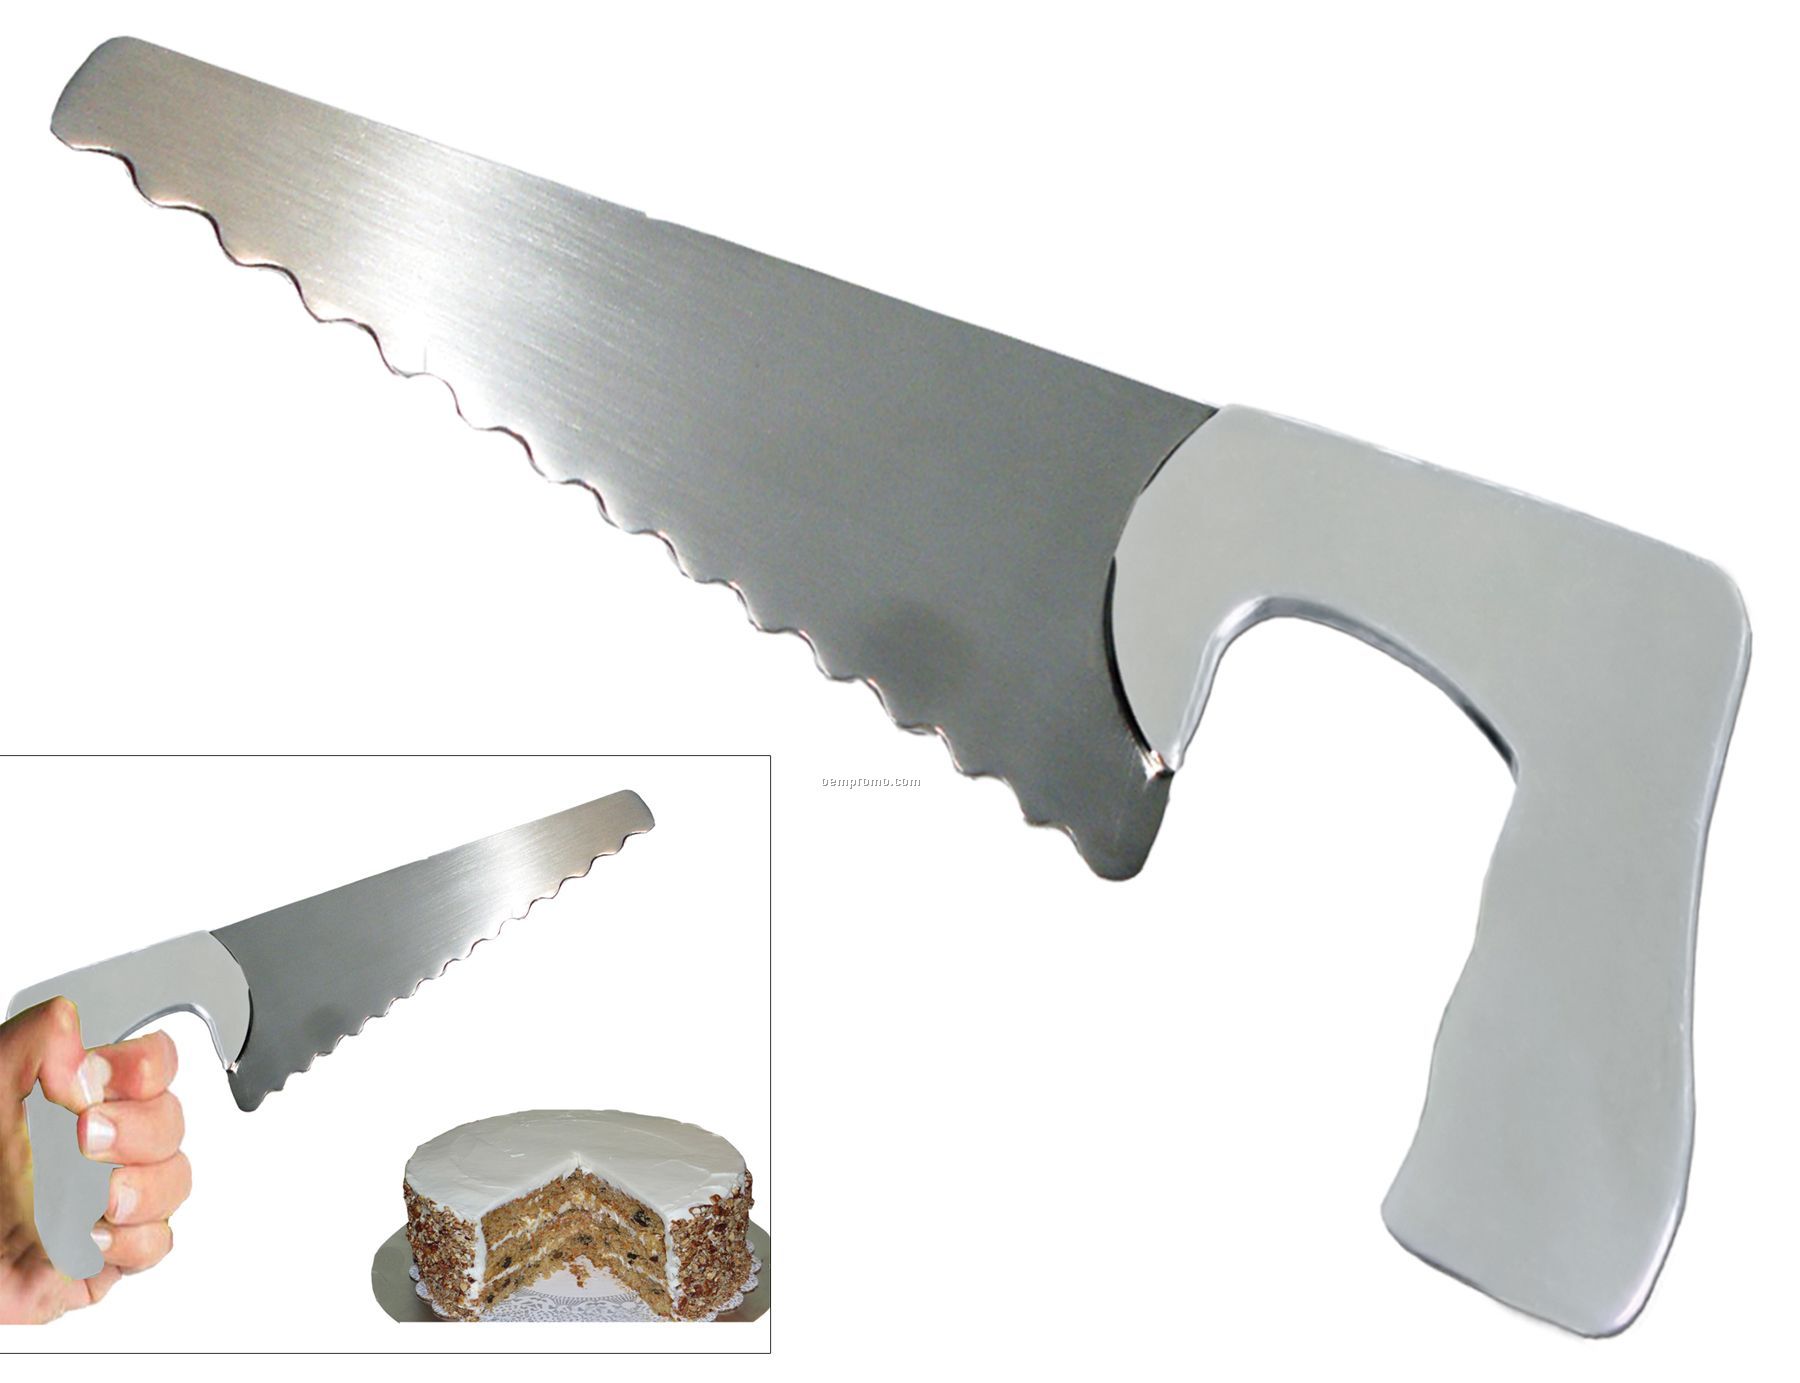 Stainless Steel Saw Shaped Cake Server